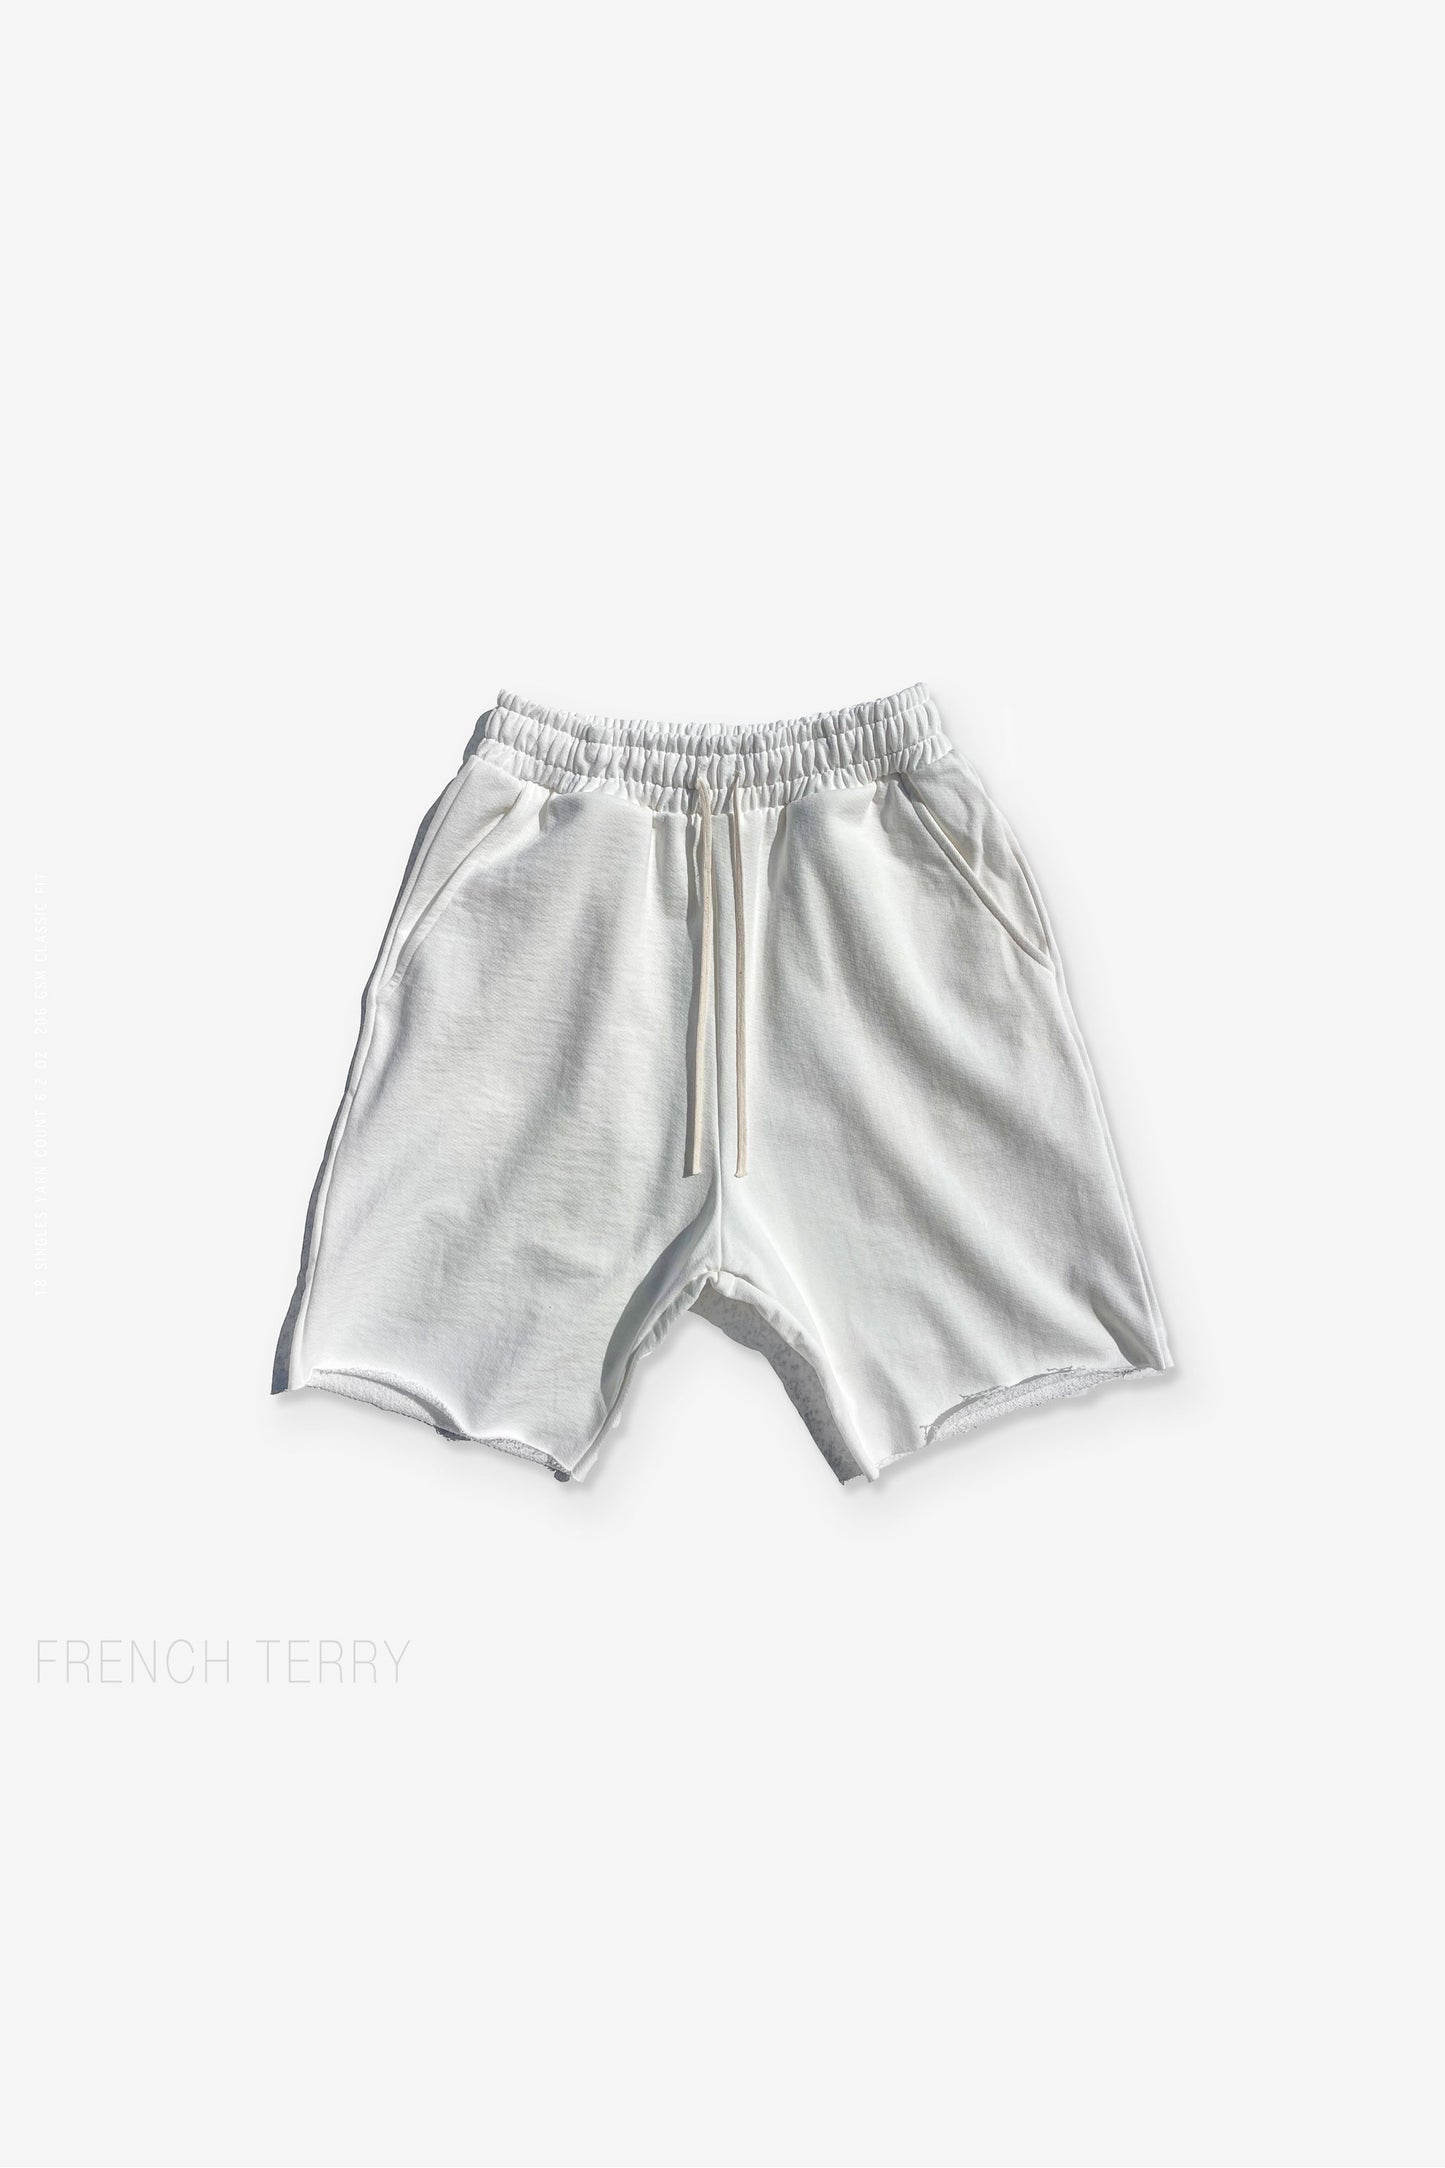 ⭐️ New  FRENCH TERRY Raw edge Shorts